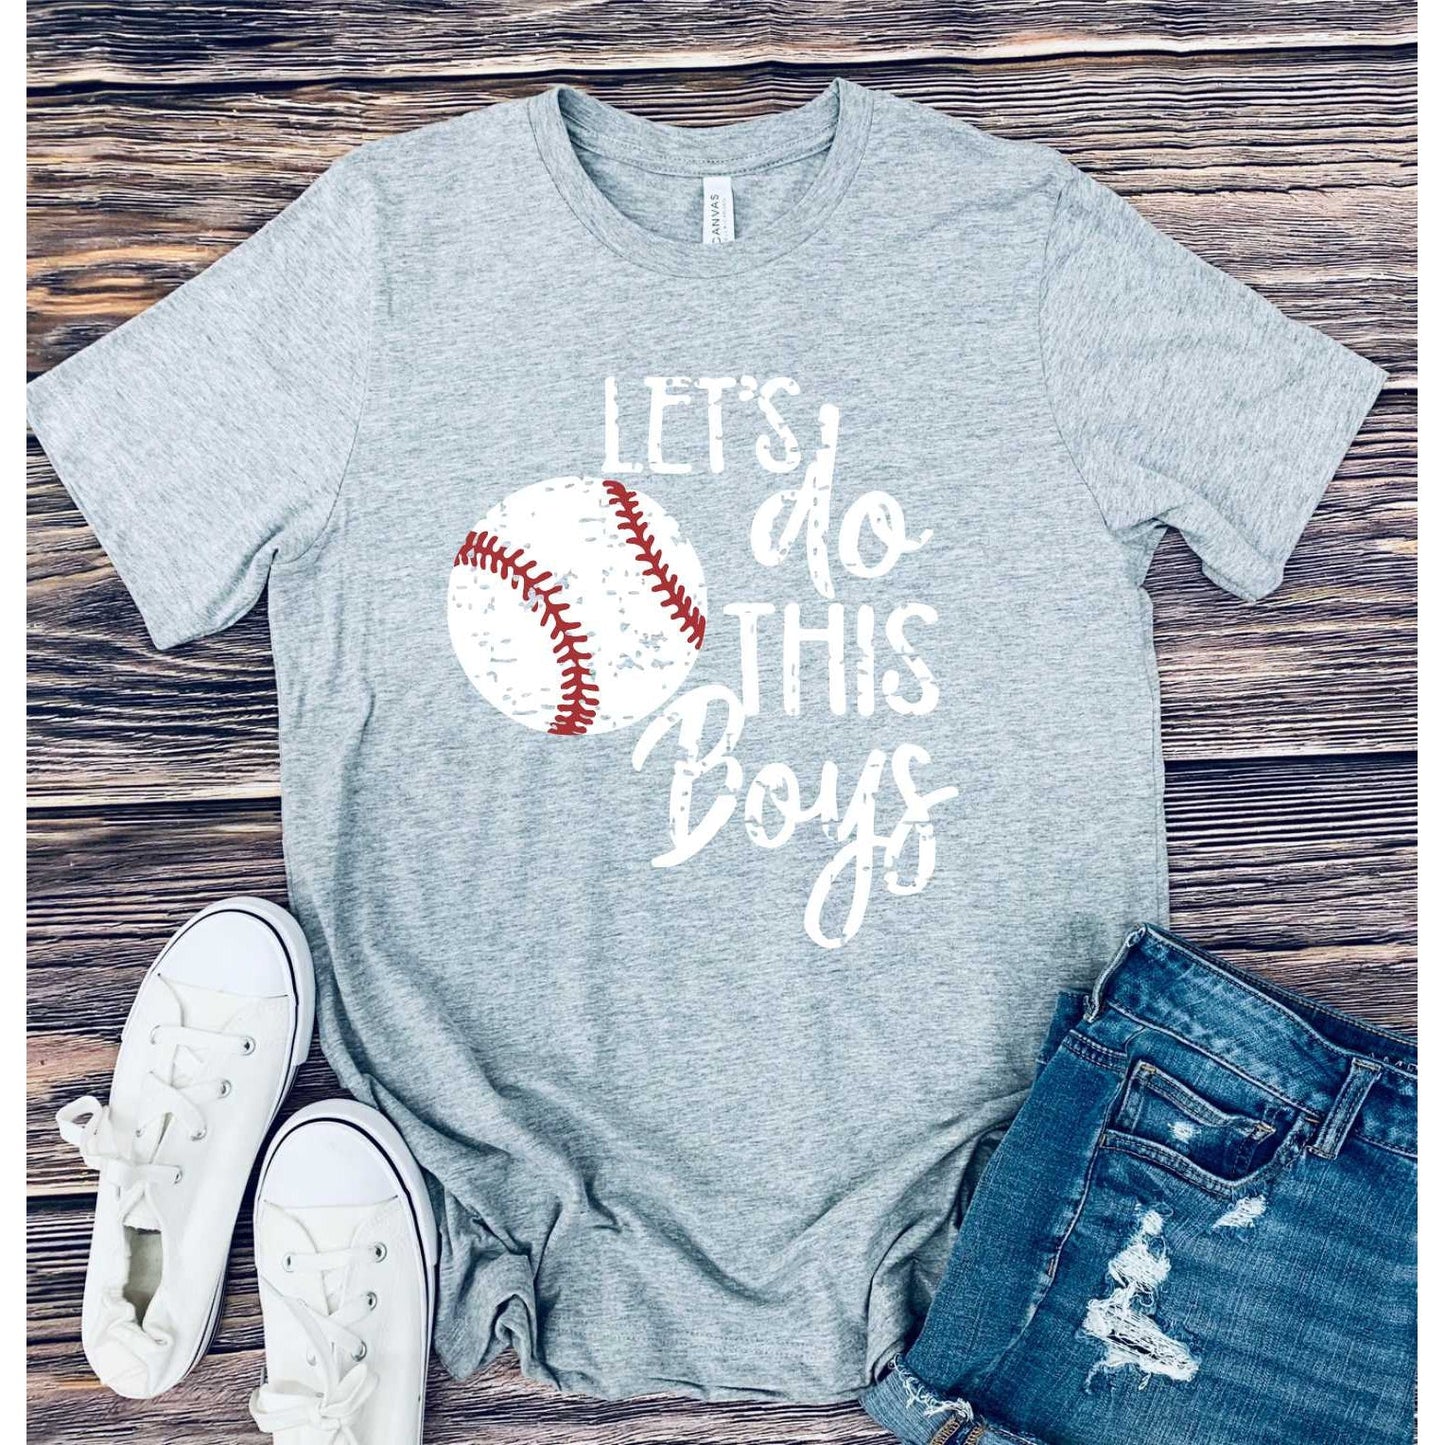 Baseball Let's do this boys graphic tee